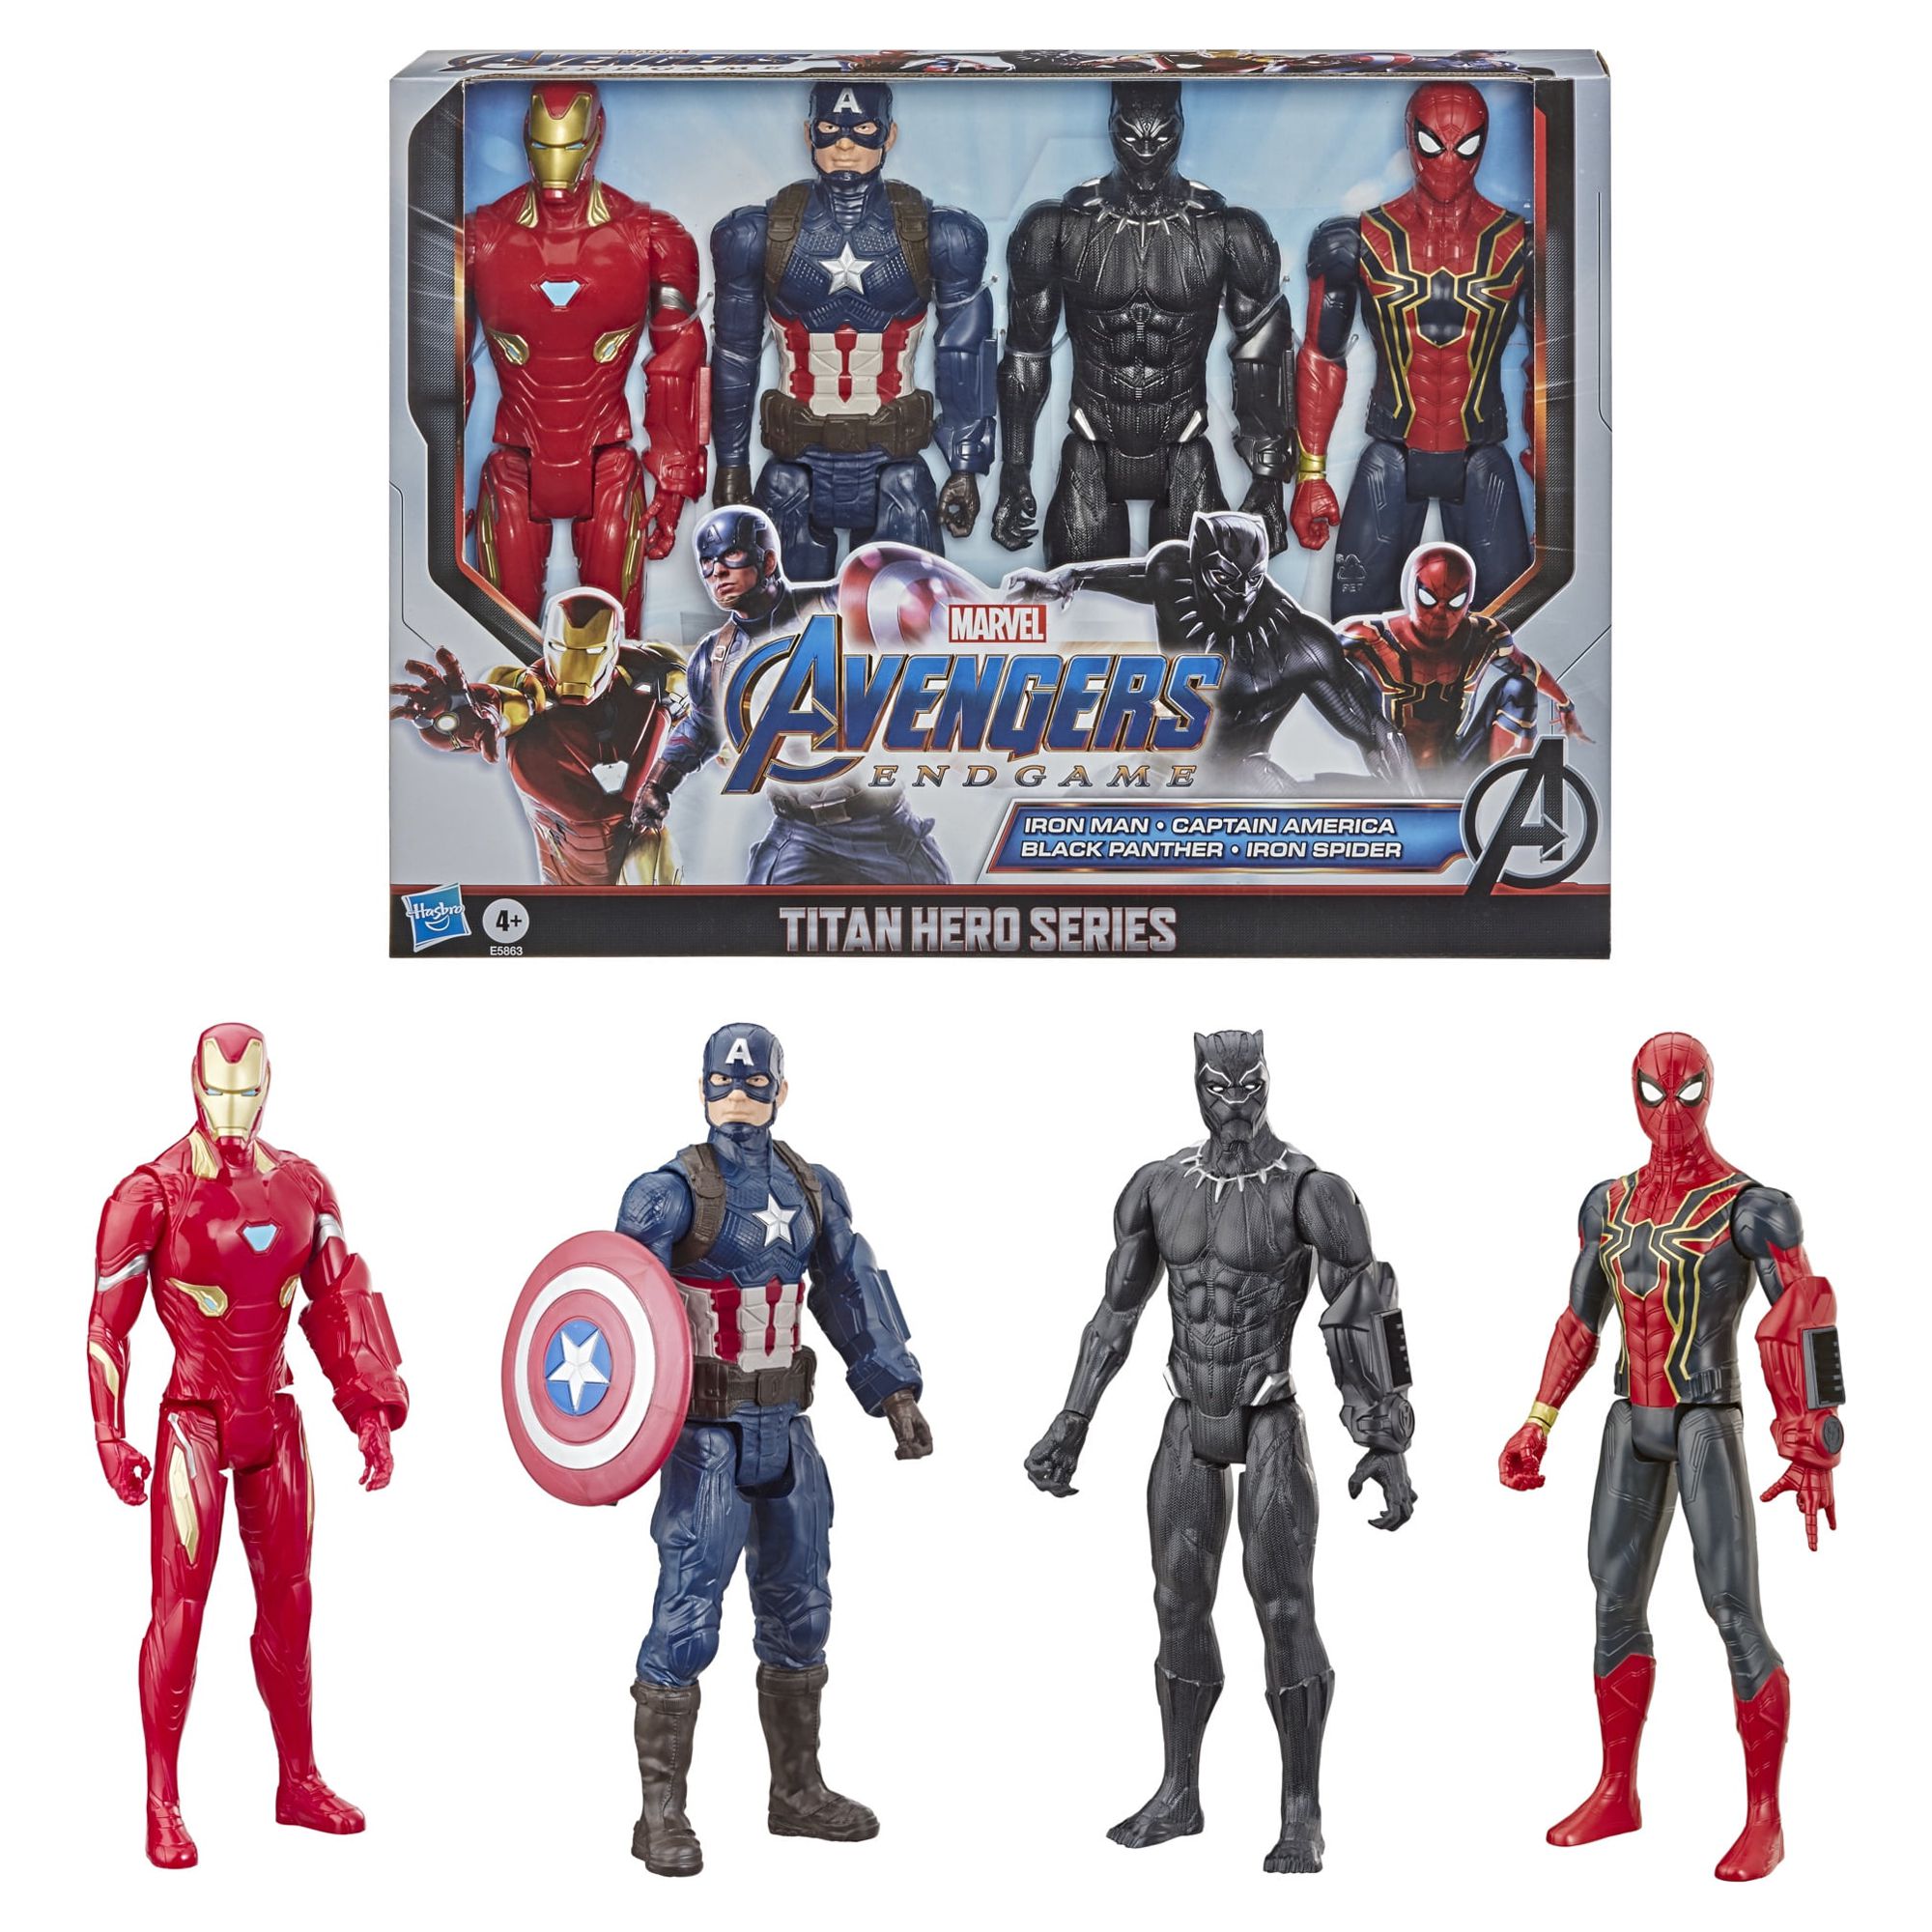 Marvel Avengers: Titan Hero Series Captain America, Iron Spider, Black Panther, and Iron Man Kids Toy Action Figure for Boys and Girls (12") - image 1 of 7